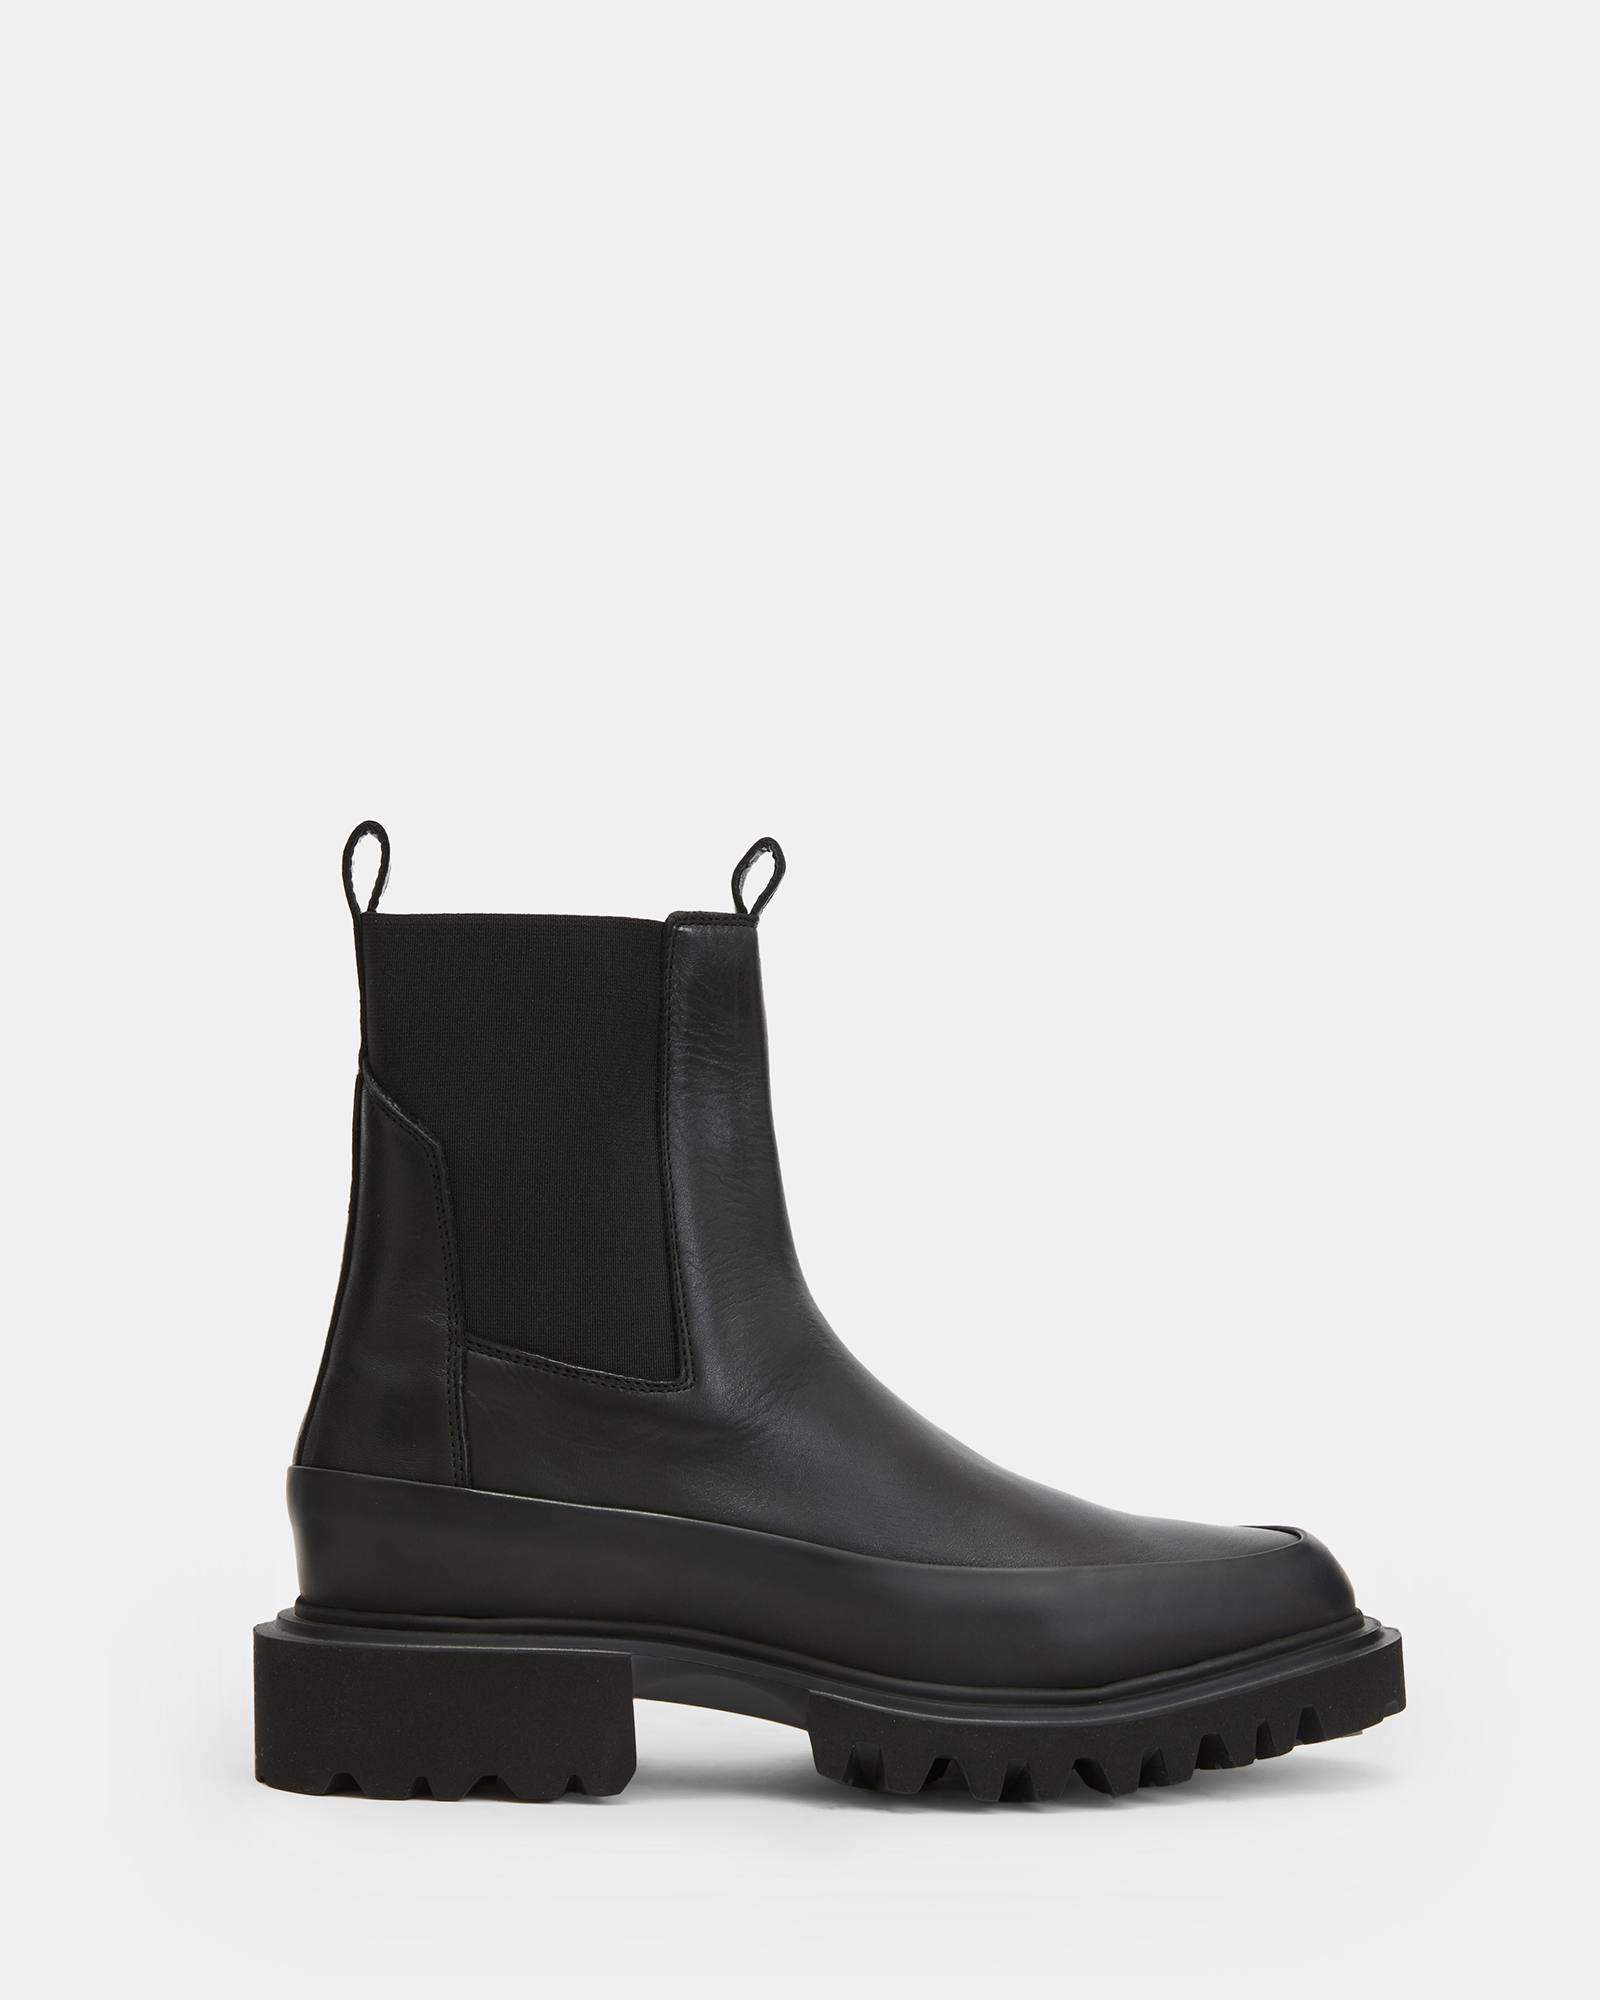 Allsaints Harlee Chunky Sole Leather Boots,, Black, Size: Uk 3/Us 6/Eu 36